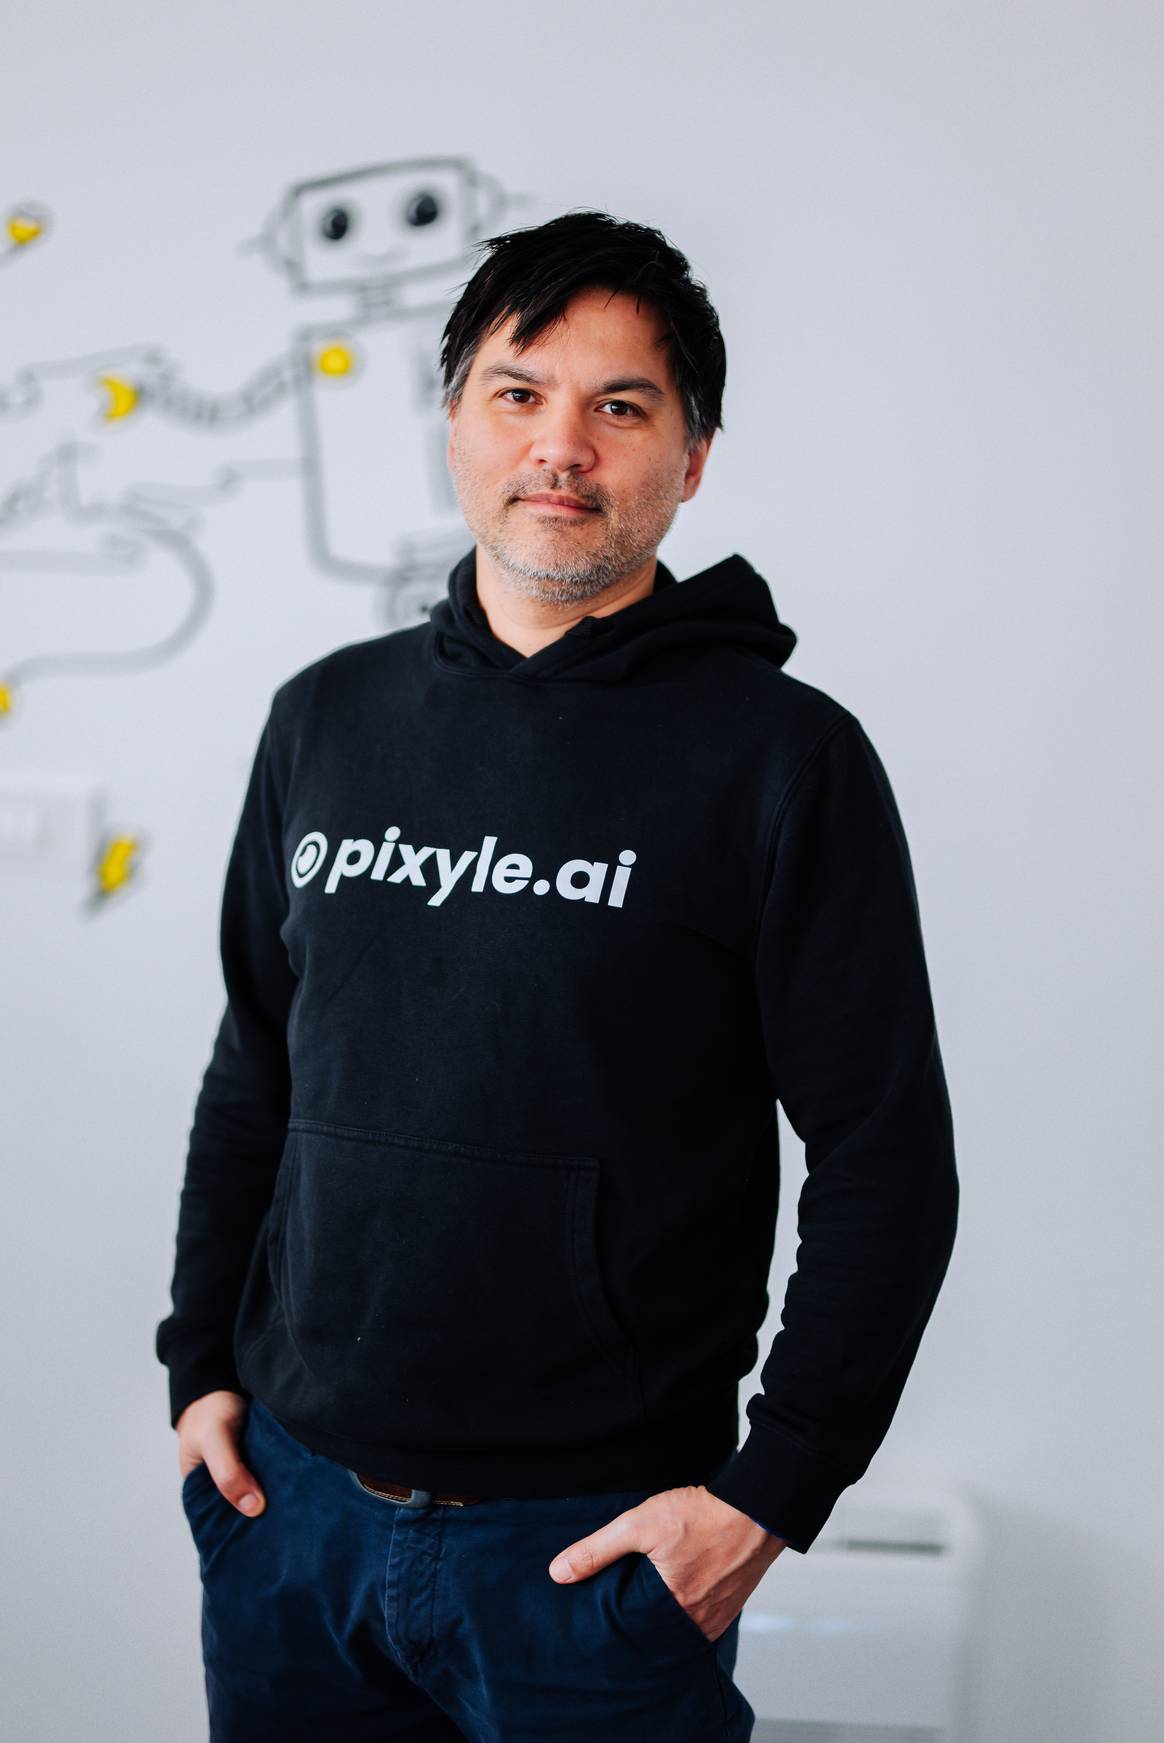 Roland Simon, Co-Founder and Chief-Growth officer at Pixyle.ai